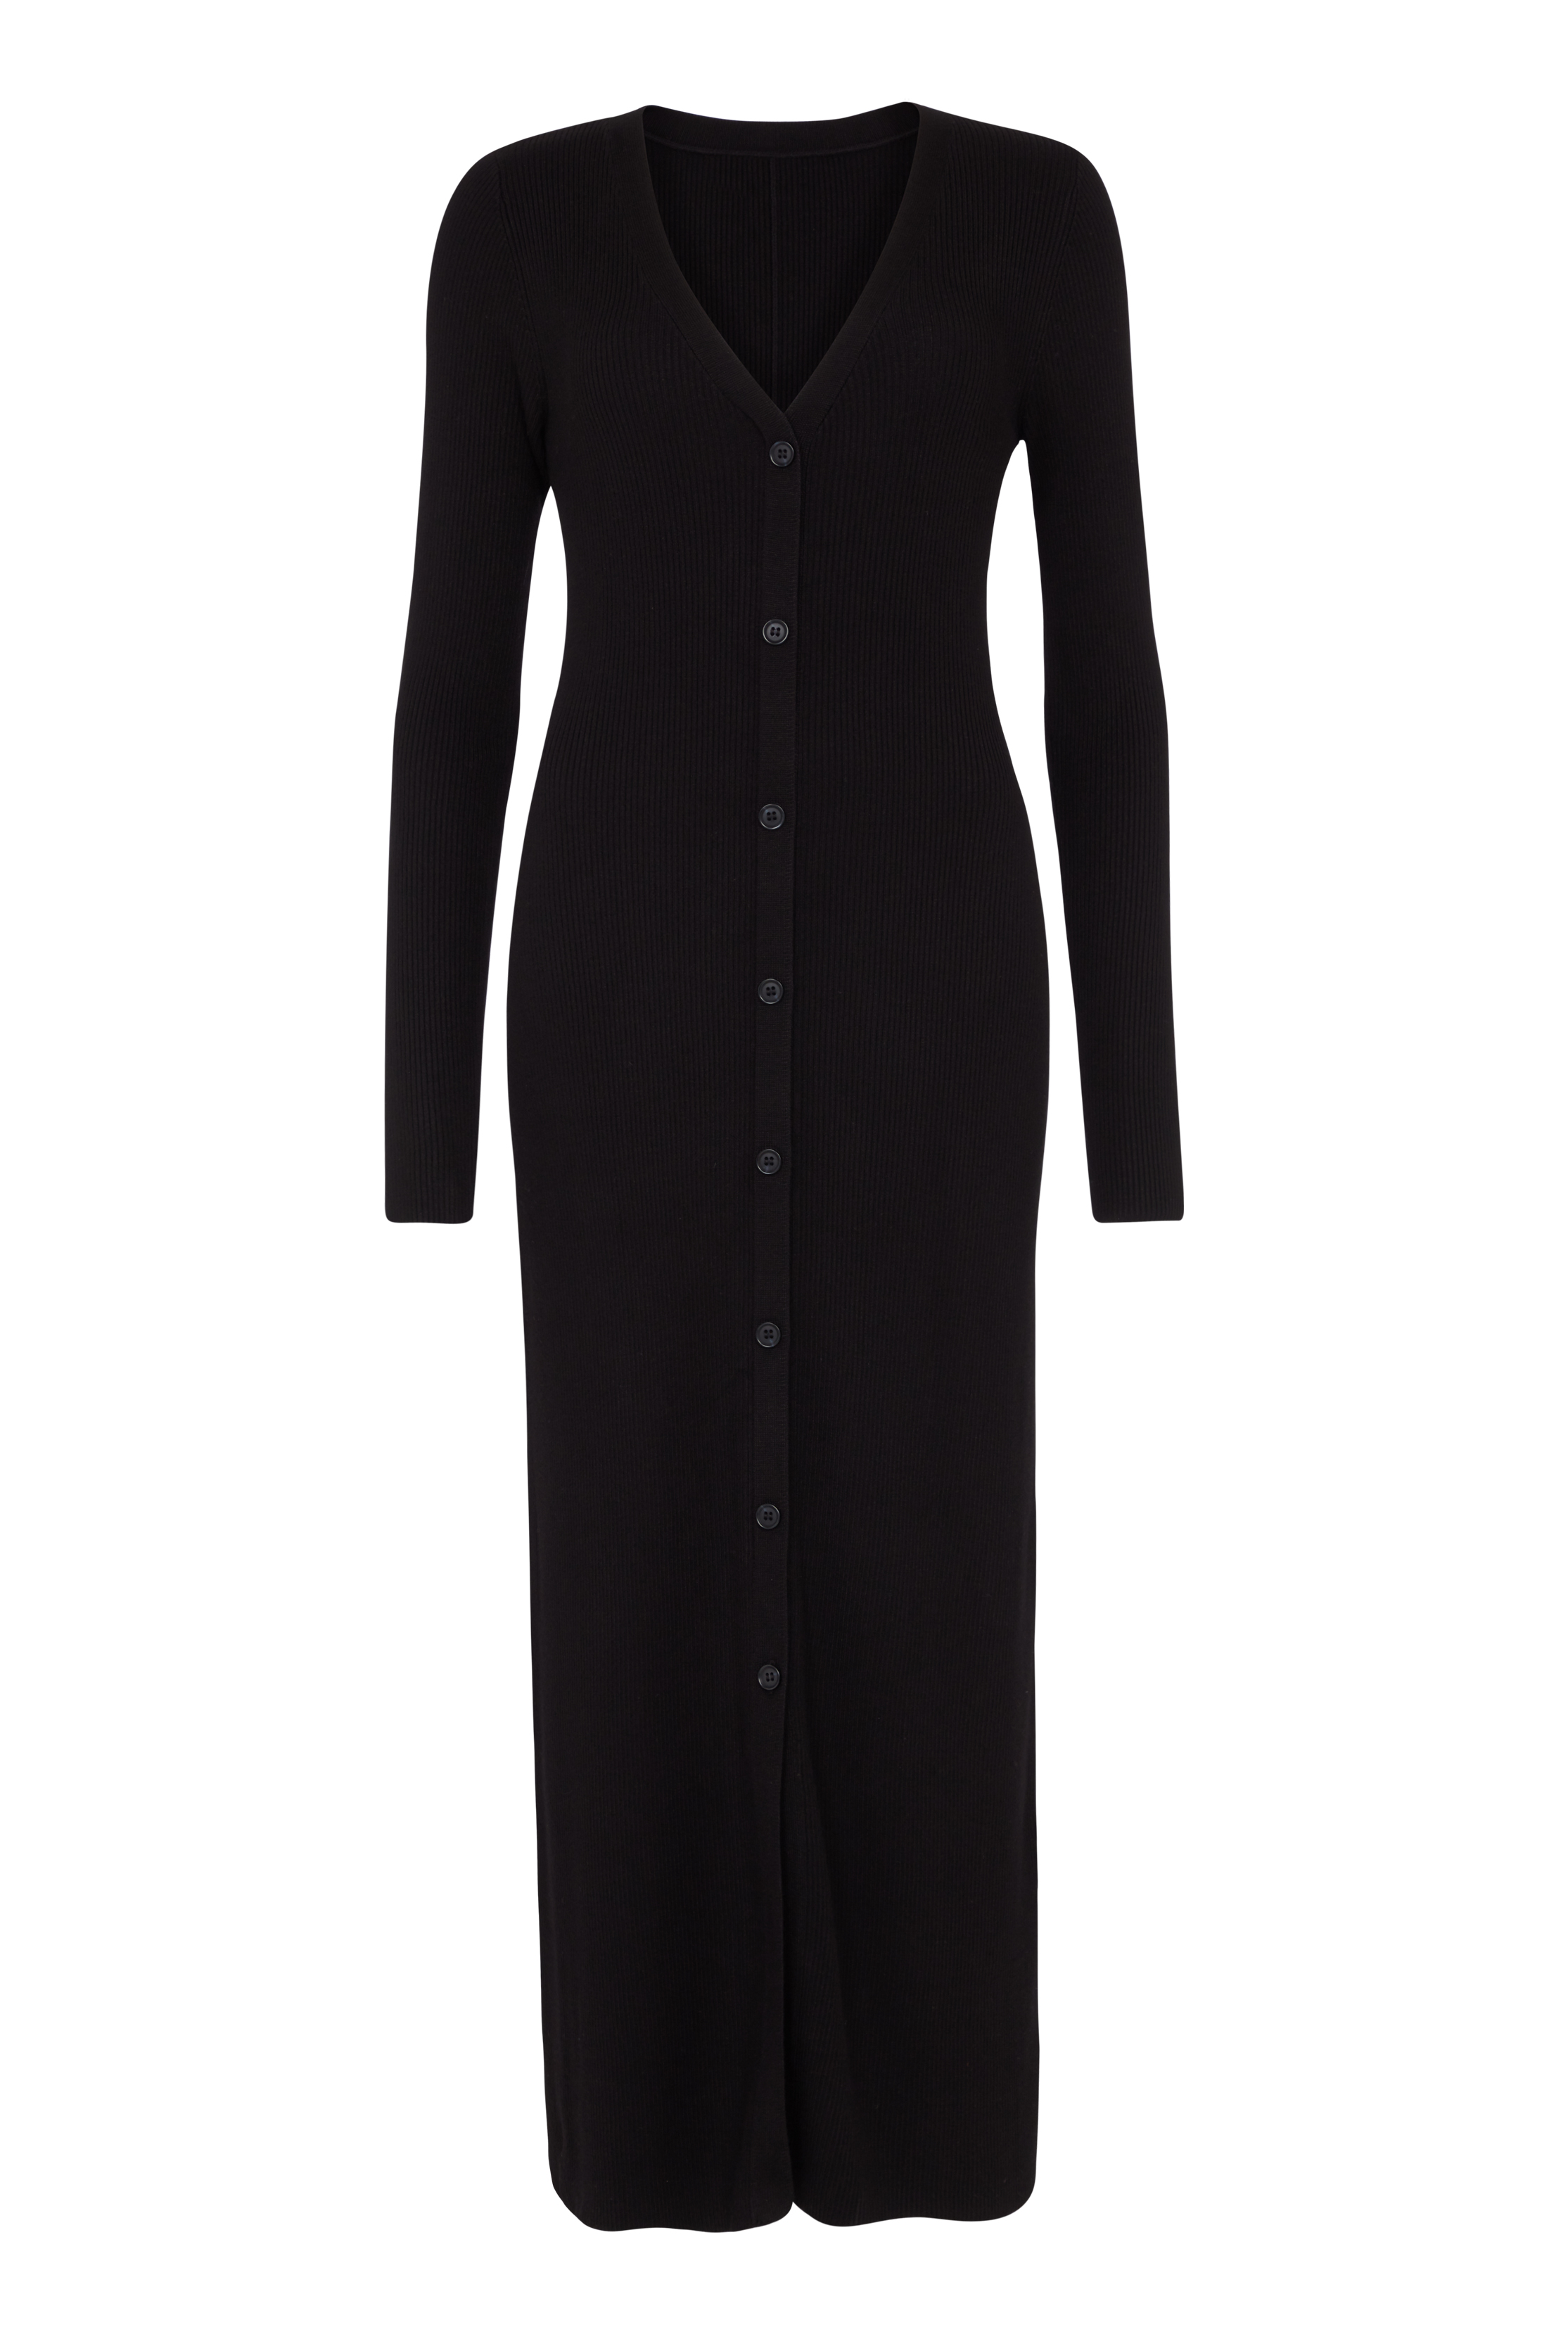 Black Ribbed Button Front Dress | Long Tall Sally